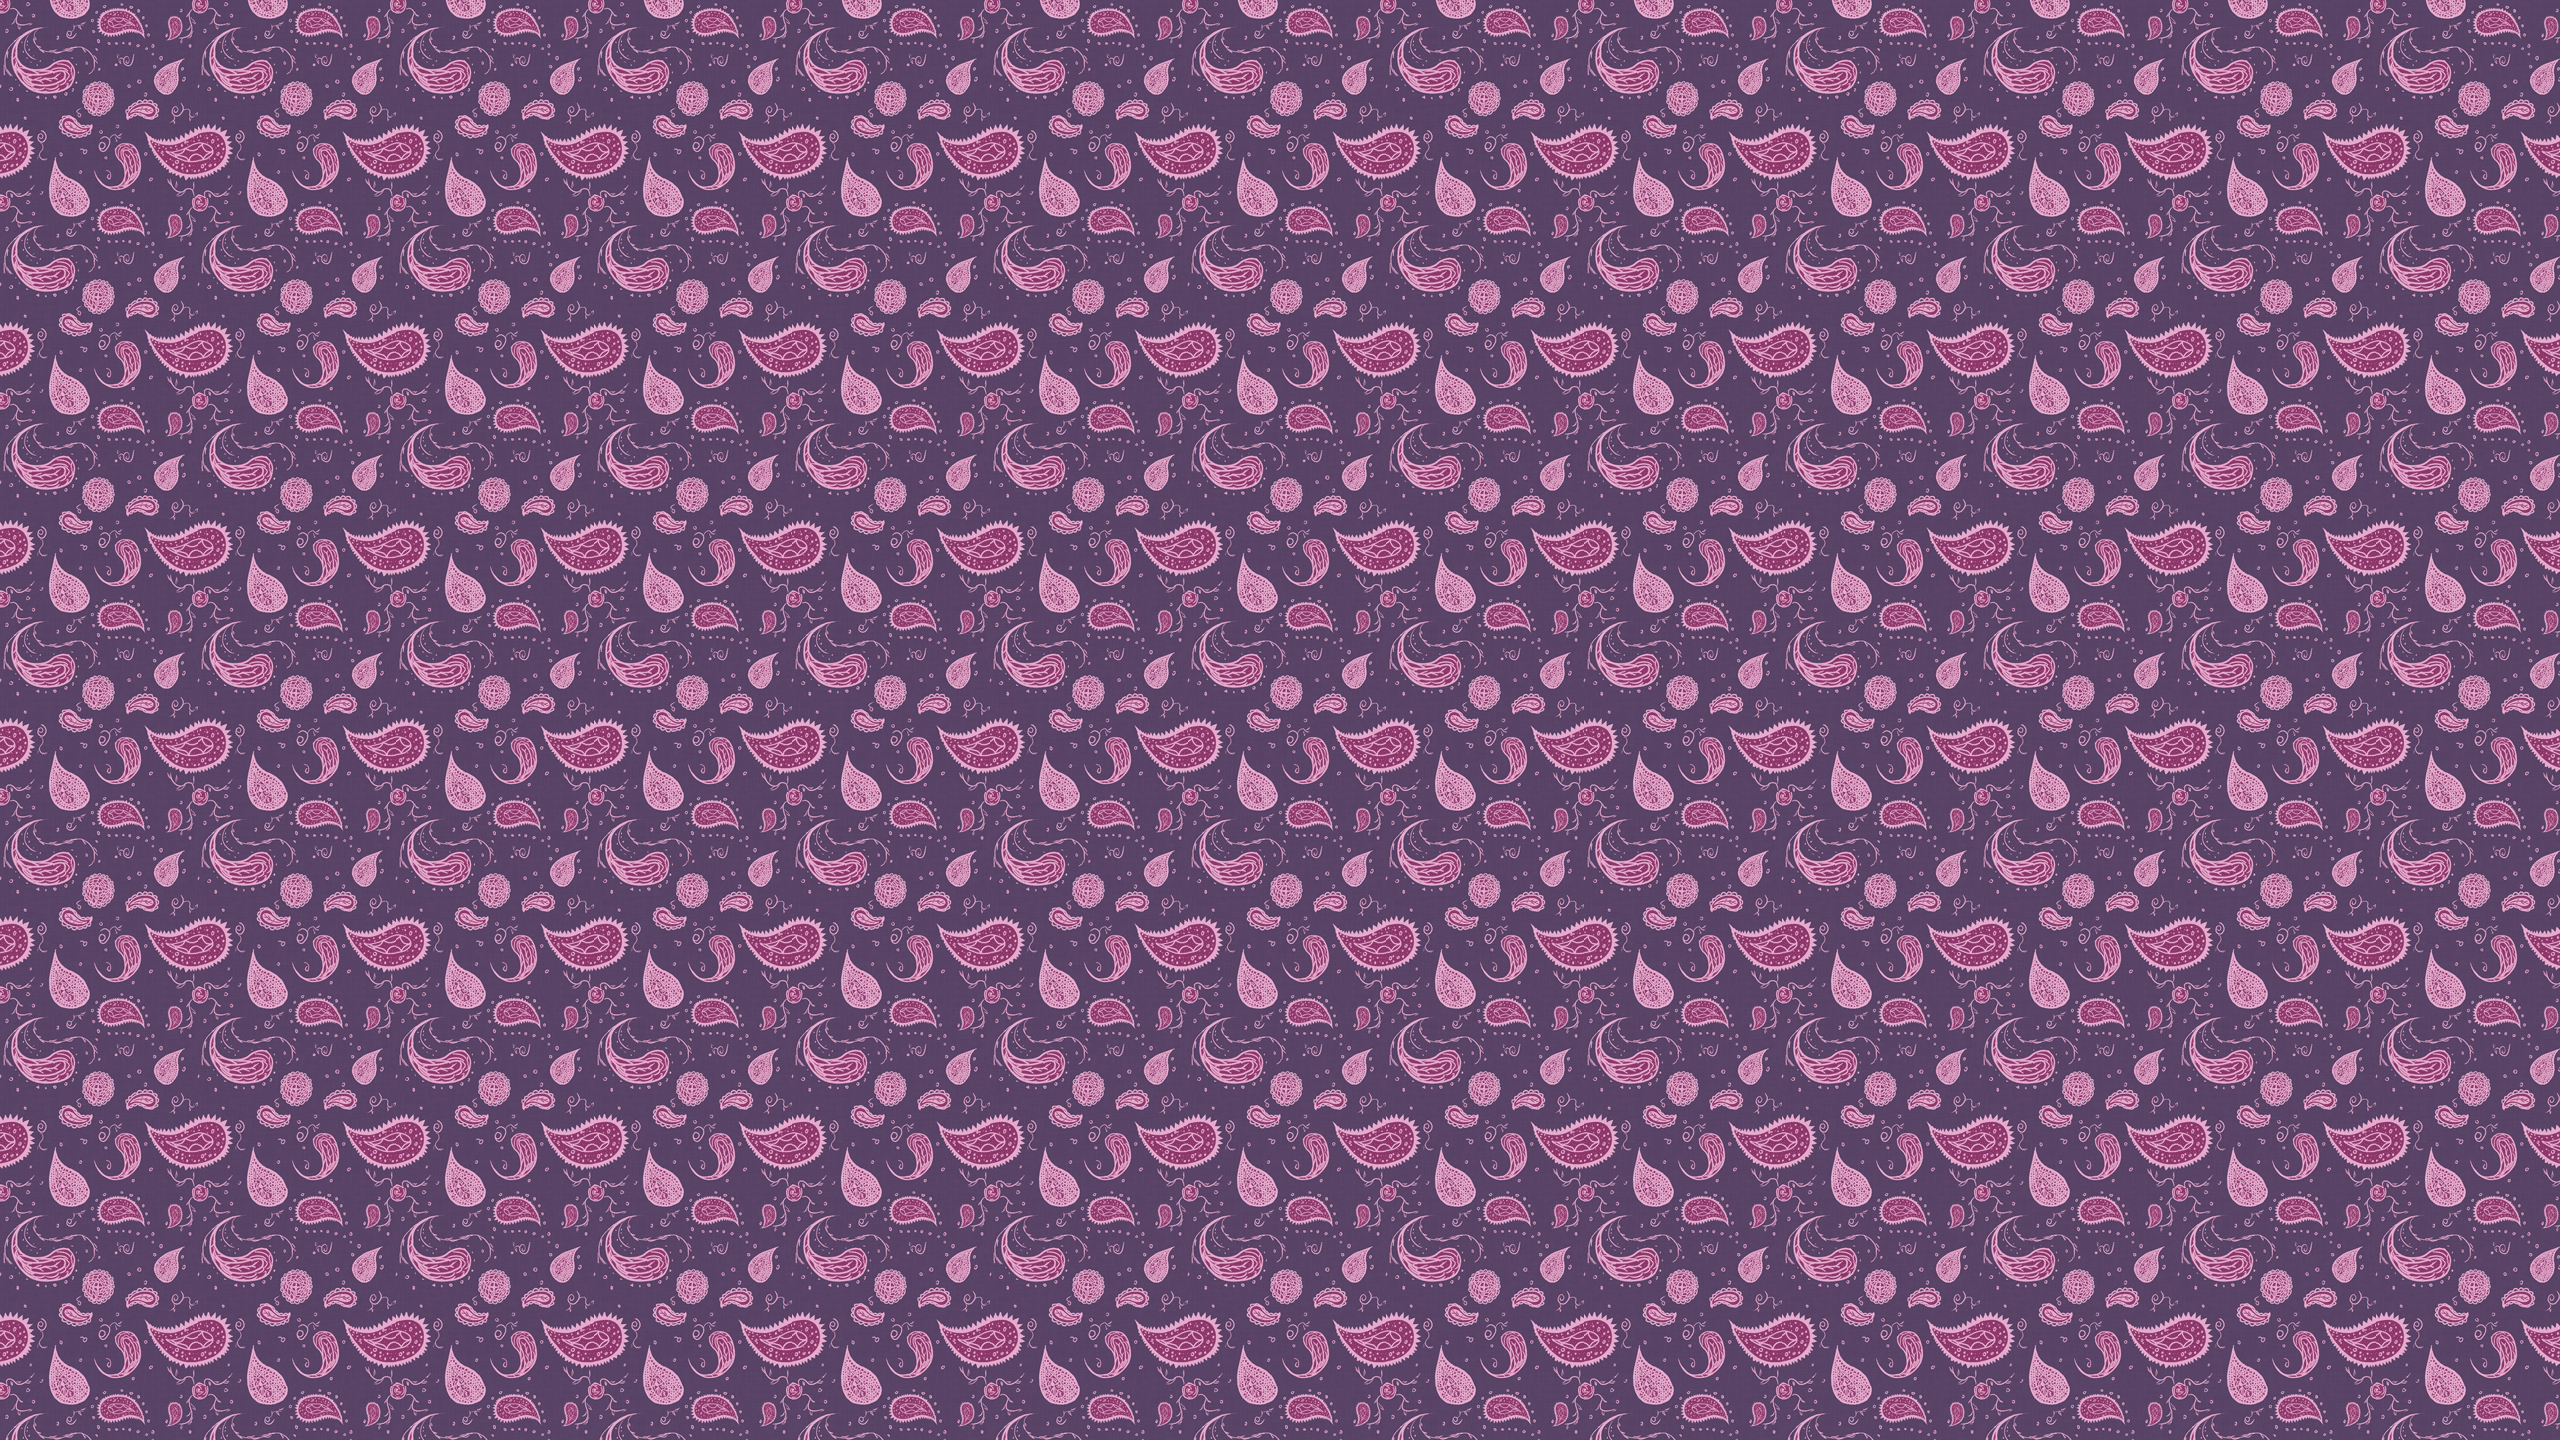 2560x1440 Free download Displaying 17 Images For Purple Paisley Background [] for your Desktop, Mobile \u0026 Tablet | Explore 41+ Purple Paisley Wallpaper | Navy Blue Paisley Wallpaper, Large Paisley Print Wallpaper, White Paisley Wallpaper